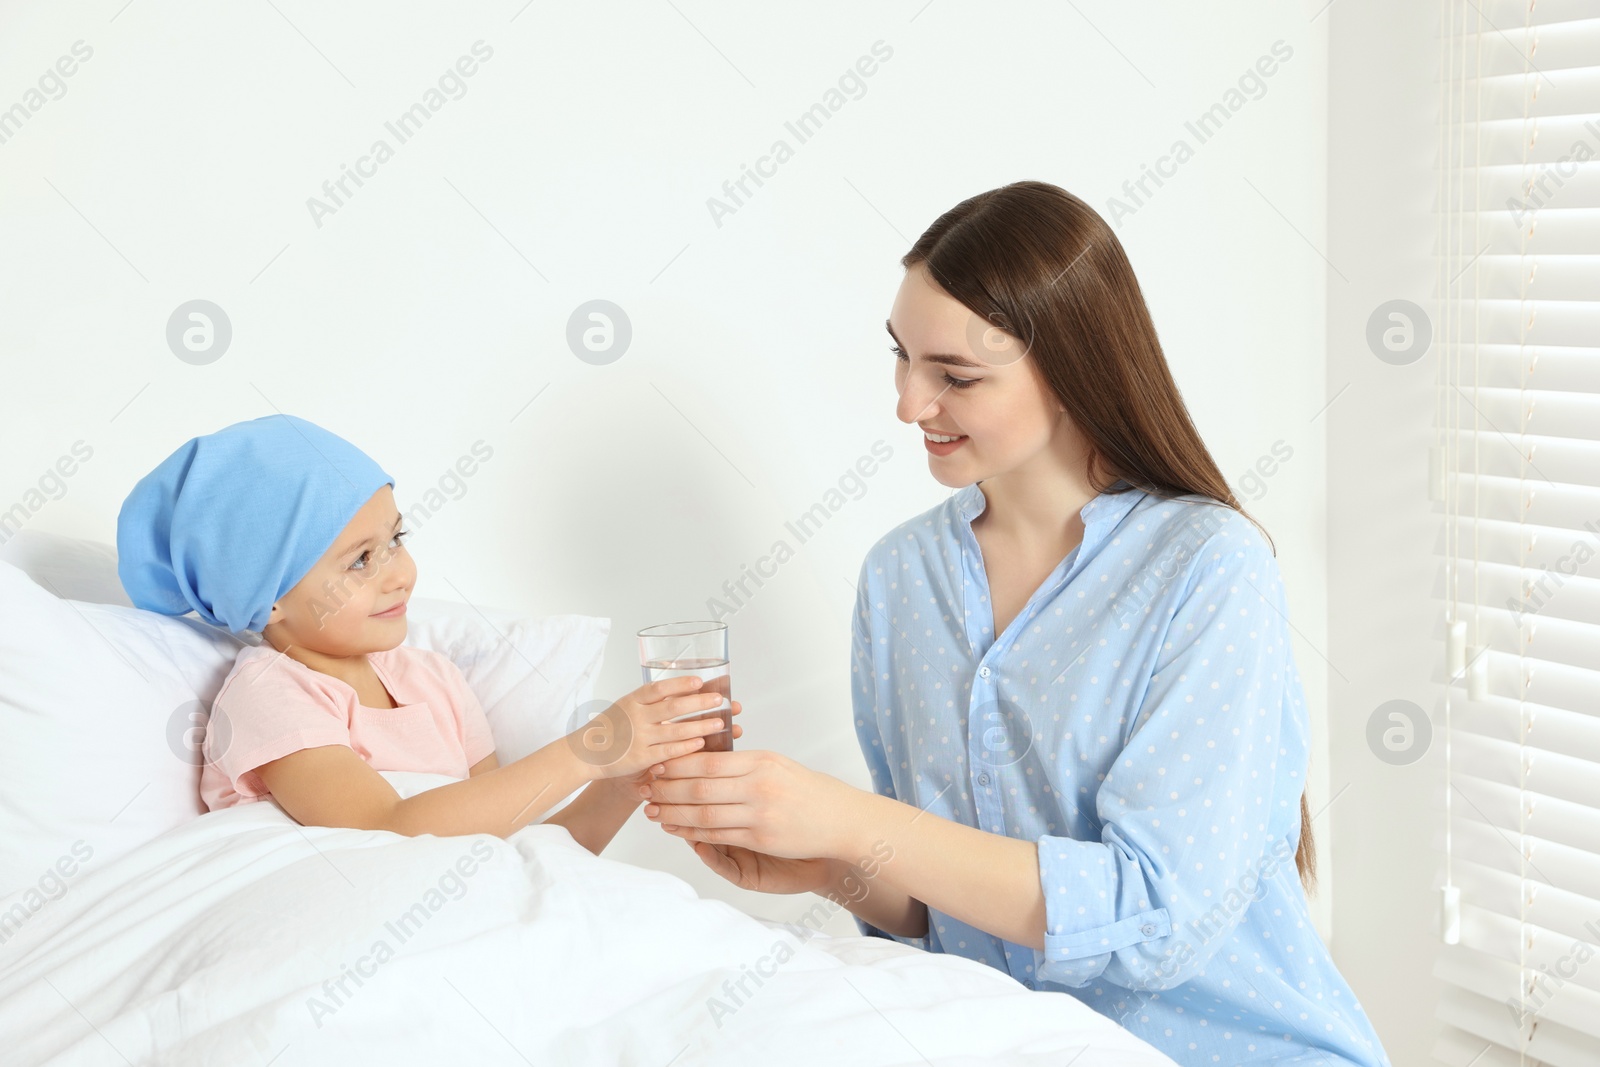 Photo of Childhood cancer. Mother giving daughter glass of water in hospital